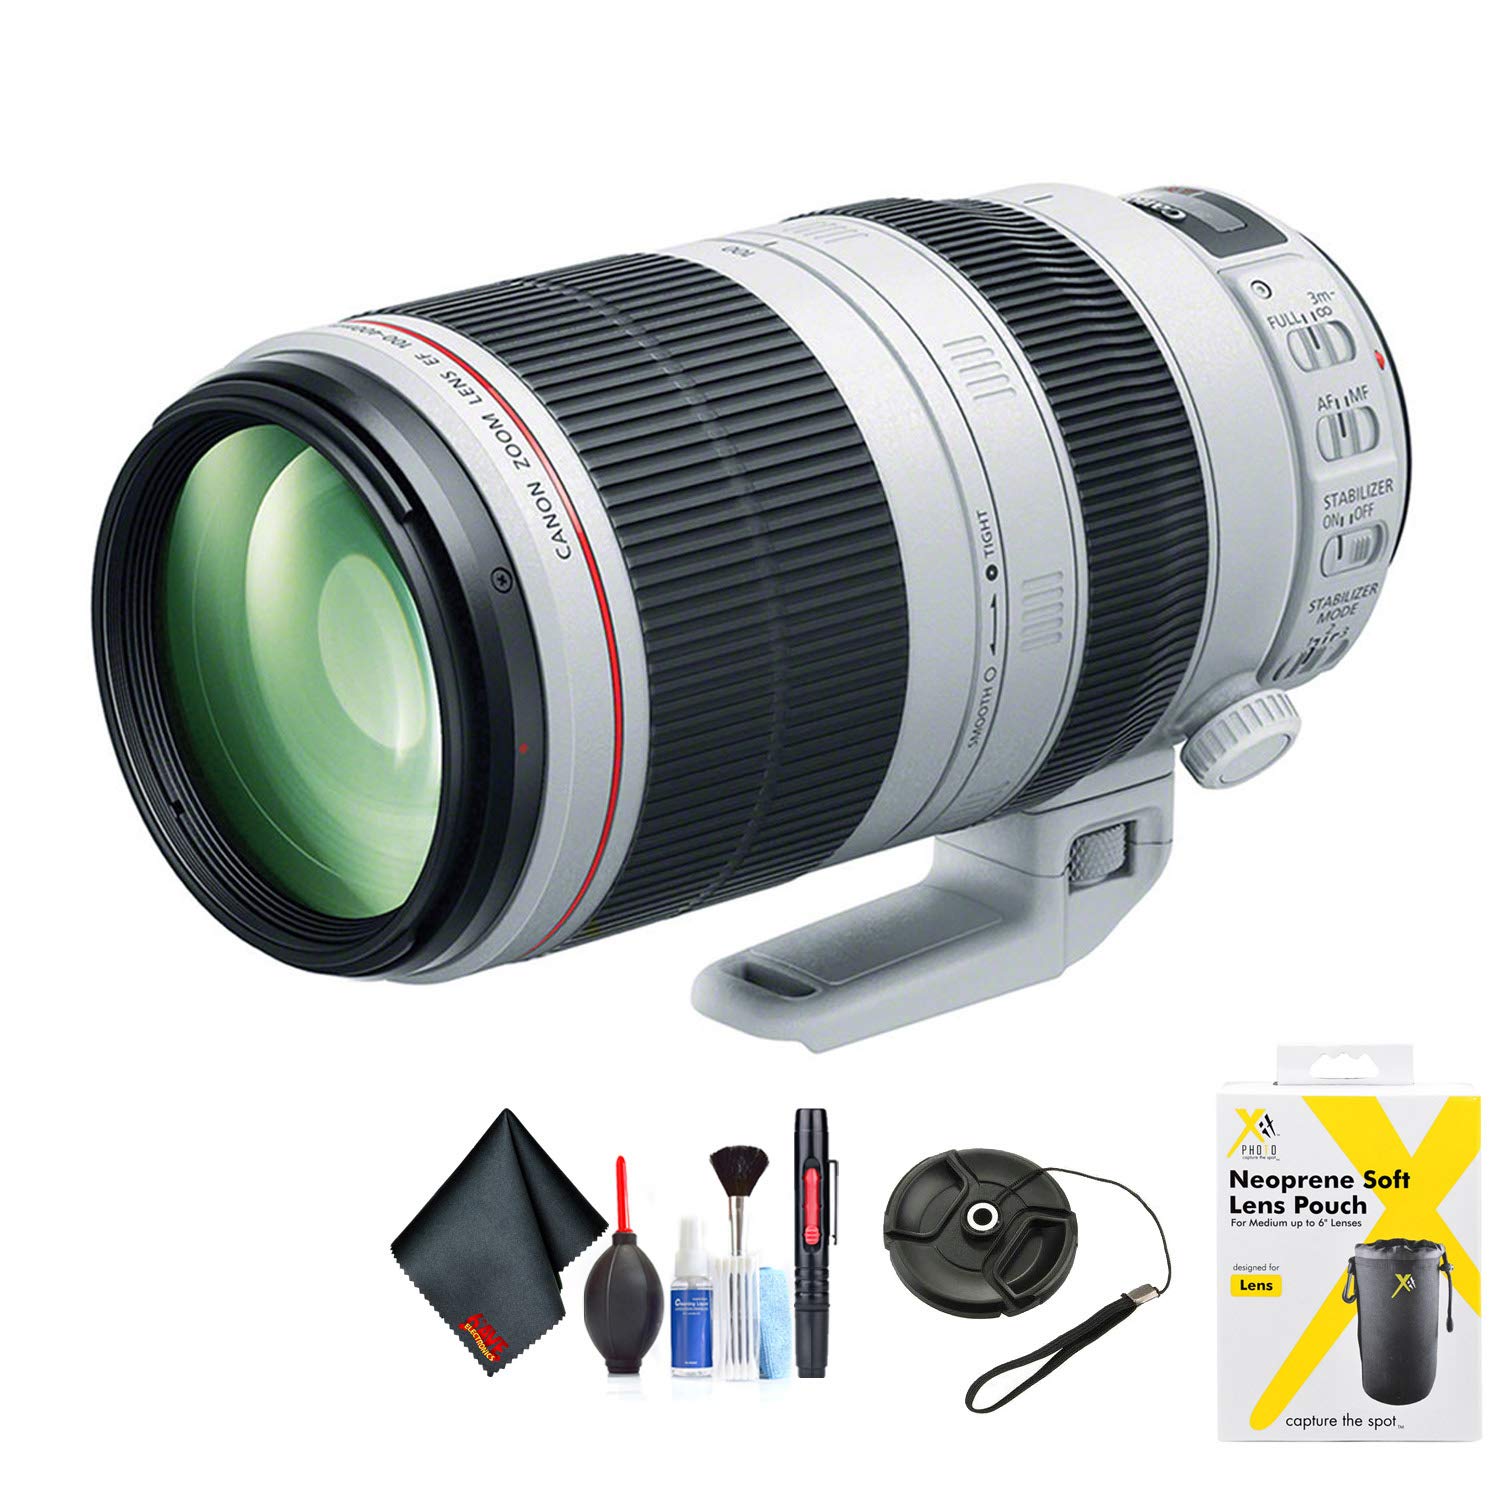 Canon EF 100-400mm f/4.5-5.6L is II USM Lens for Canon EF Mount + Accessories (International Model with 2 Year Warranty)